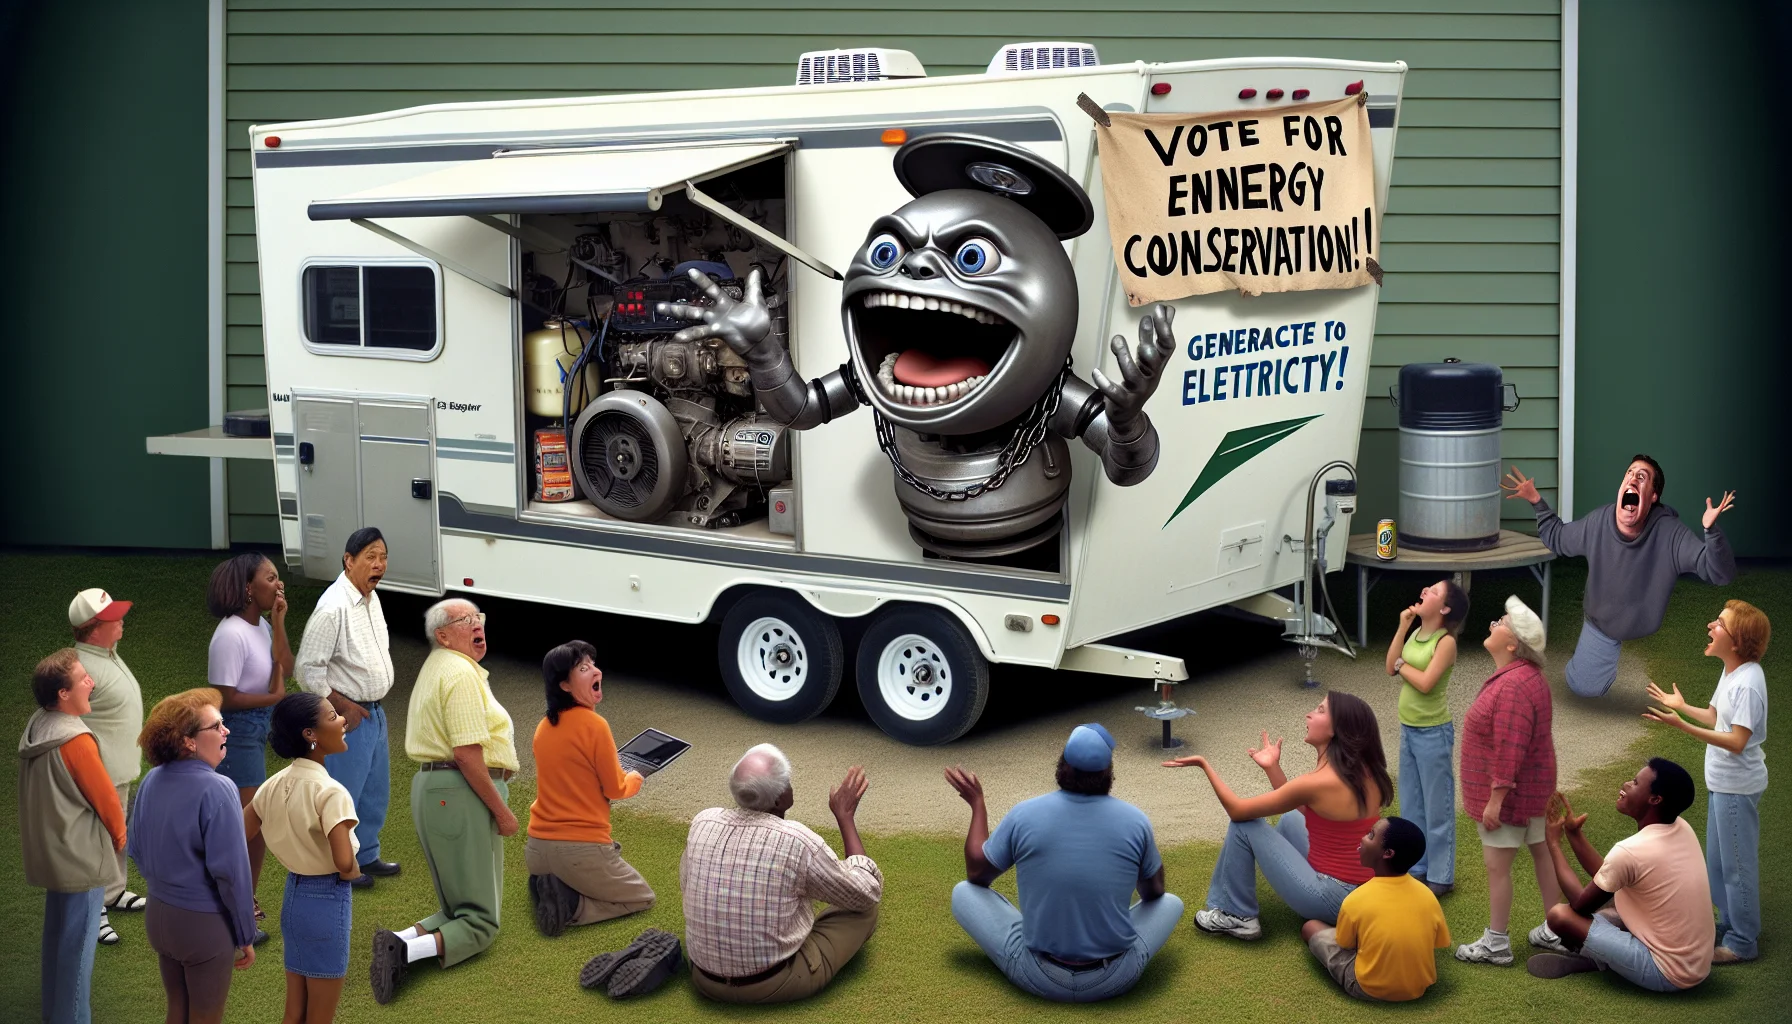 Create a humorous image that encapsulates the following scenario: a built-in RV generator has somehow become sentient and is humorously attempting to persuade people to generate electricity. It is gesticulating dramatically, mouthing off persuasive speeches, and even has a makeshift 'Vote for Energy Conservation!' banner draped across its metallic exterior. Its physical ensemble reflects caricature personification with exaggerated features including expressive eyes, gesturing arms, and a resolute mouth. Around it, a crowd of diverse people - Black woman mechanic, elderly white man, South Asian teenage boy, Hispanic woman RVer - are watching in a mixture of amusement and fascination.